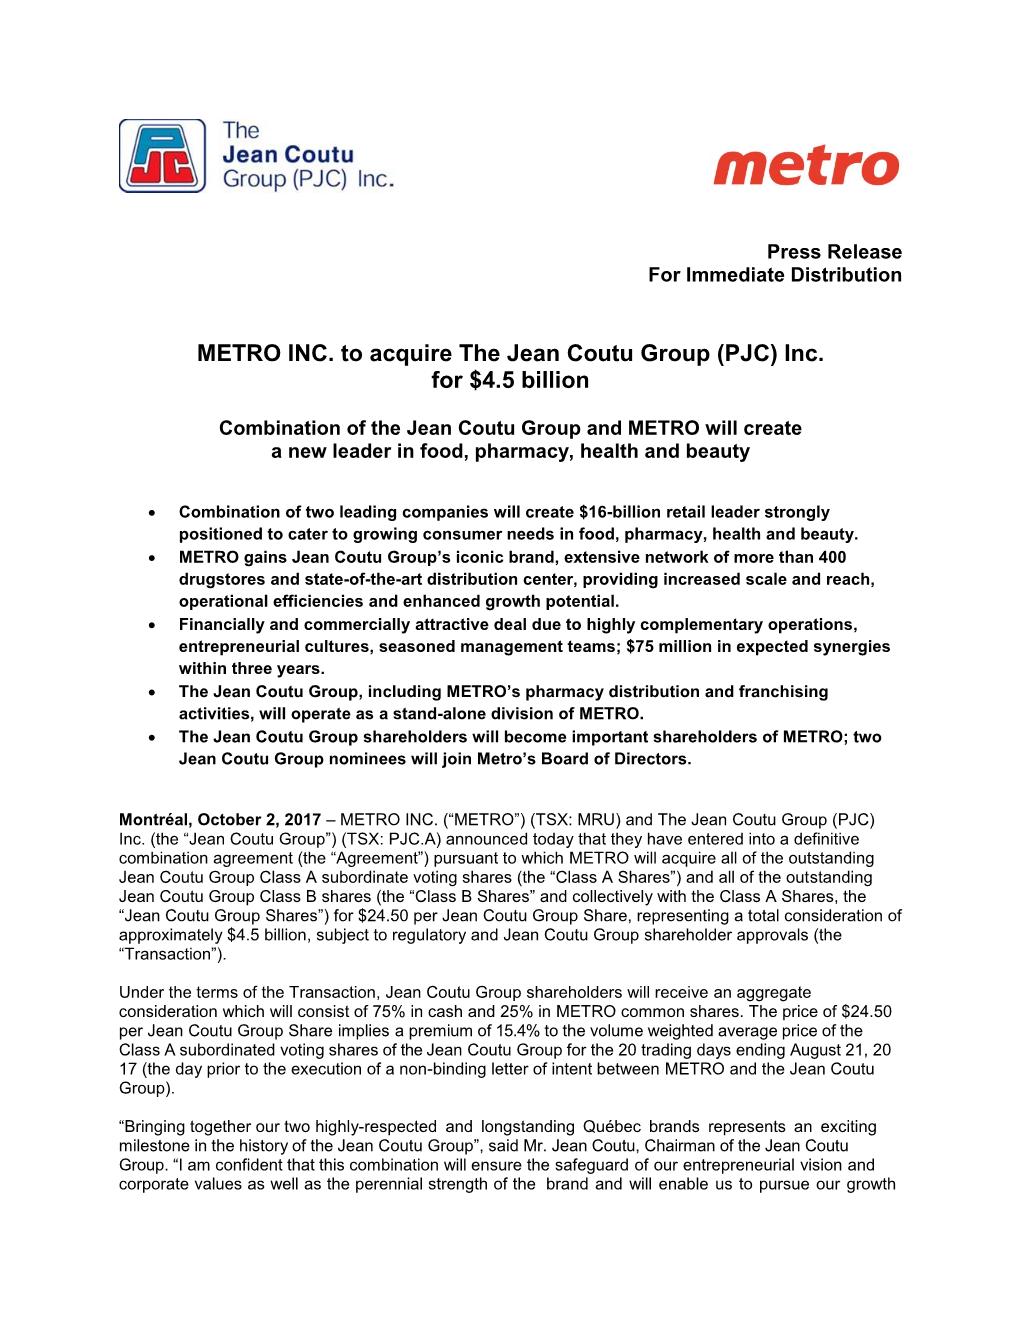 METRO INC. to Acquire the Jean Coutu Group (PJC) Inc. for $4.5 Billion